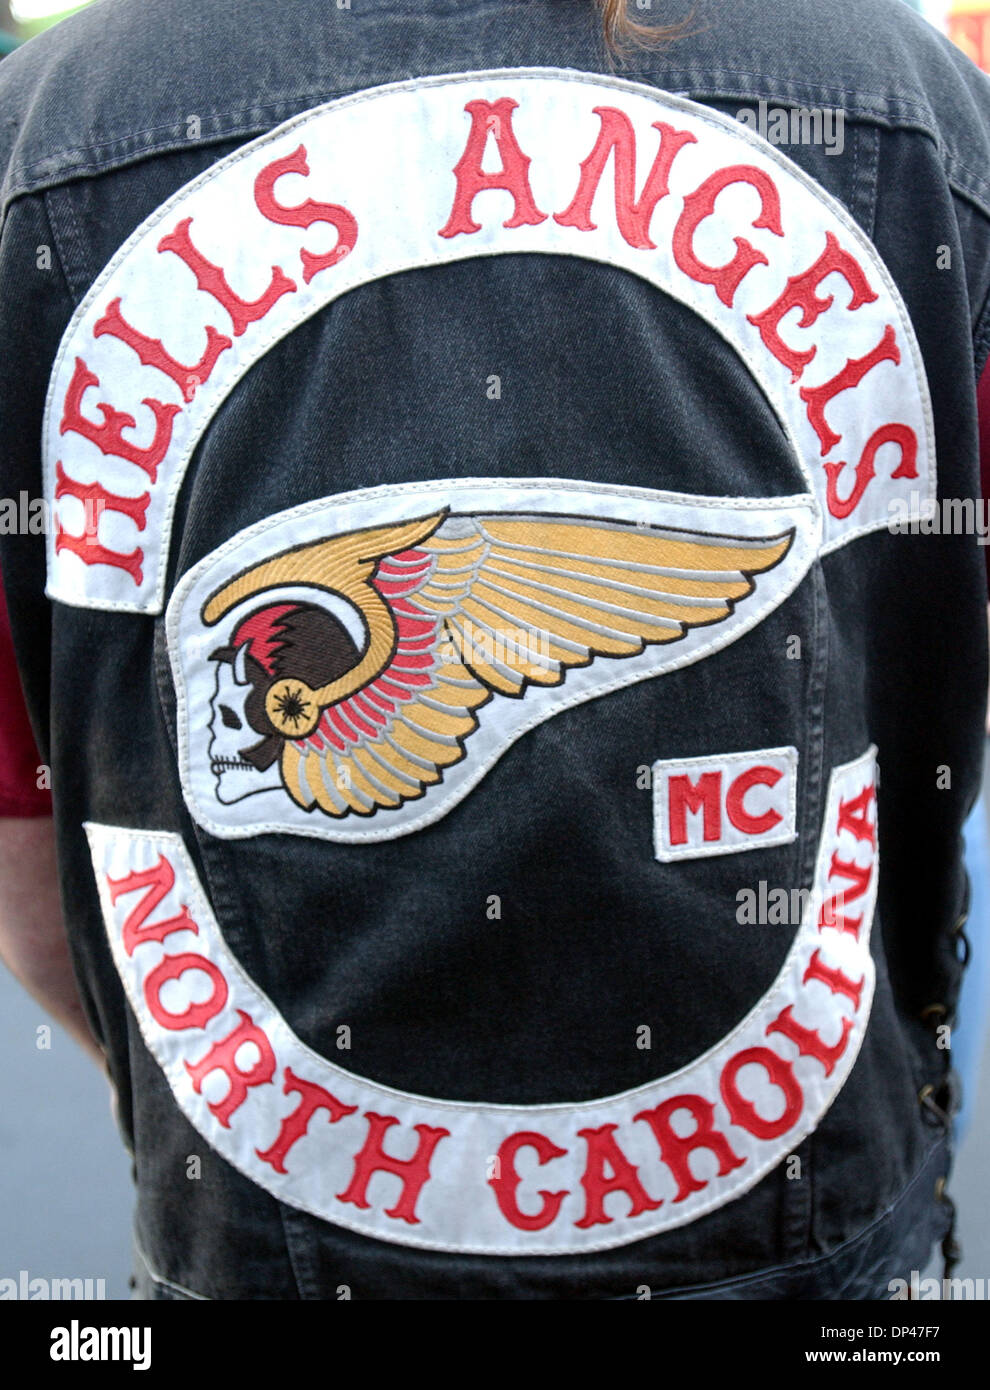 Hells angels usa High Resolution Stock Photography and Images - Alamy